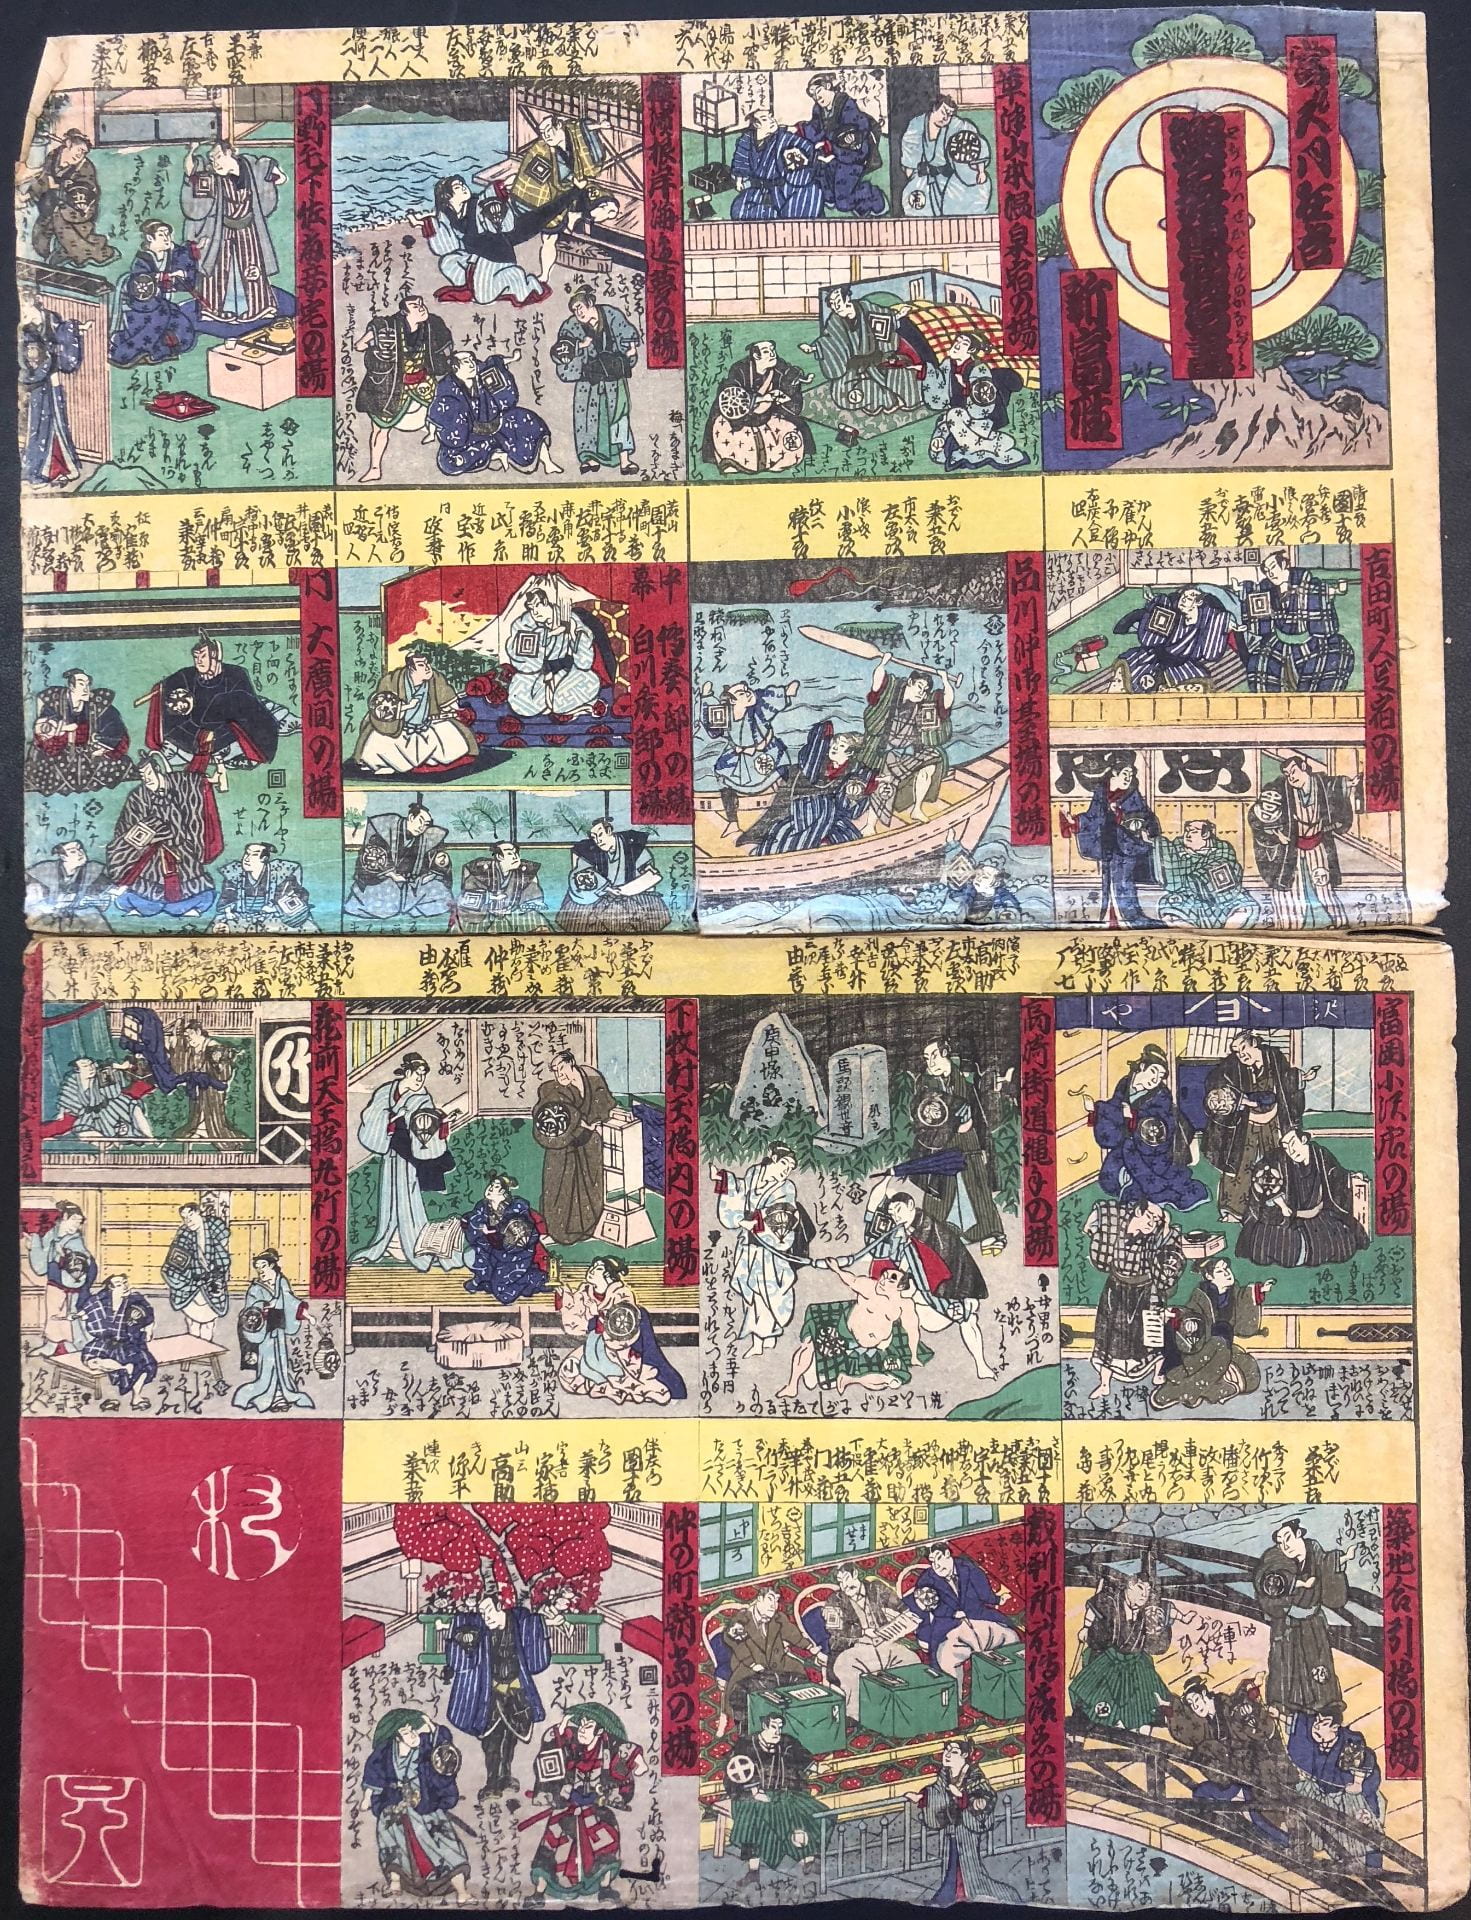 Broadside showing acts in kabuki play